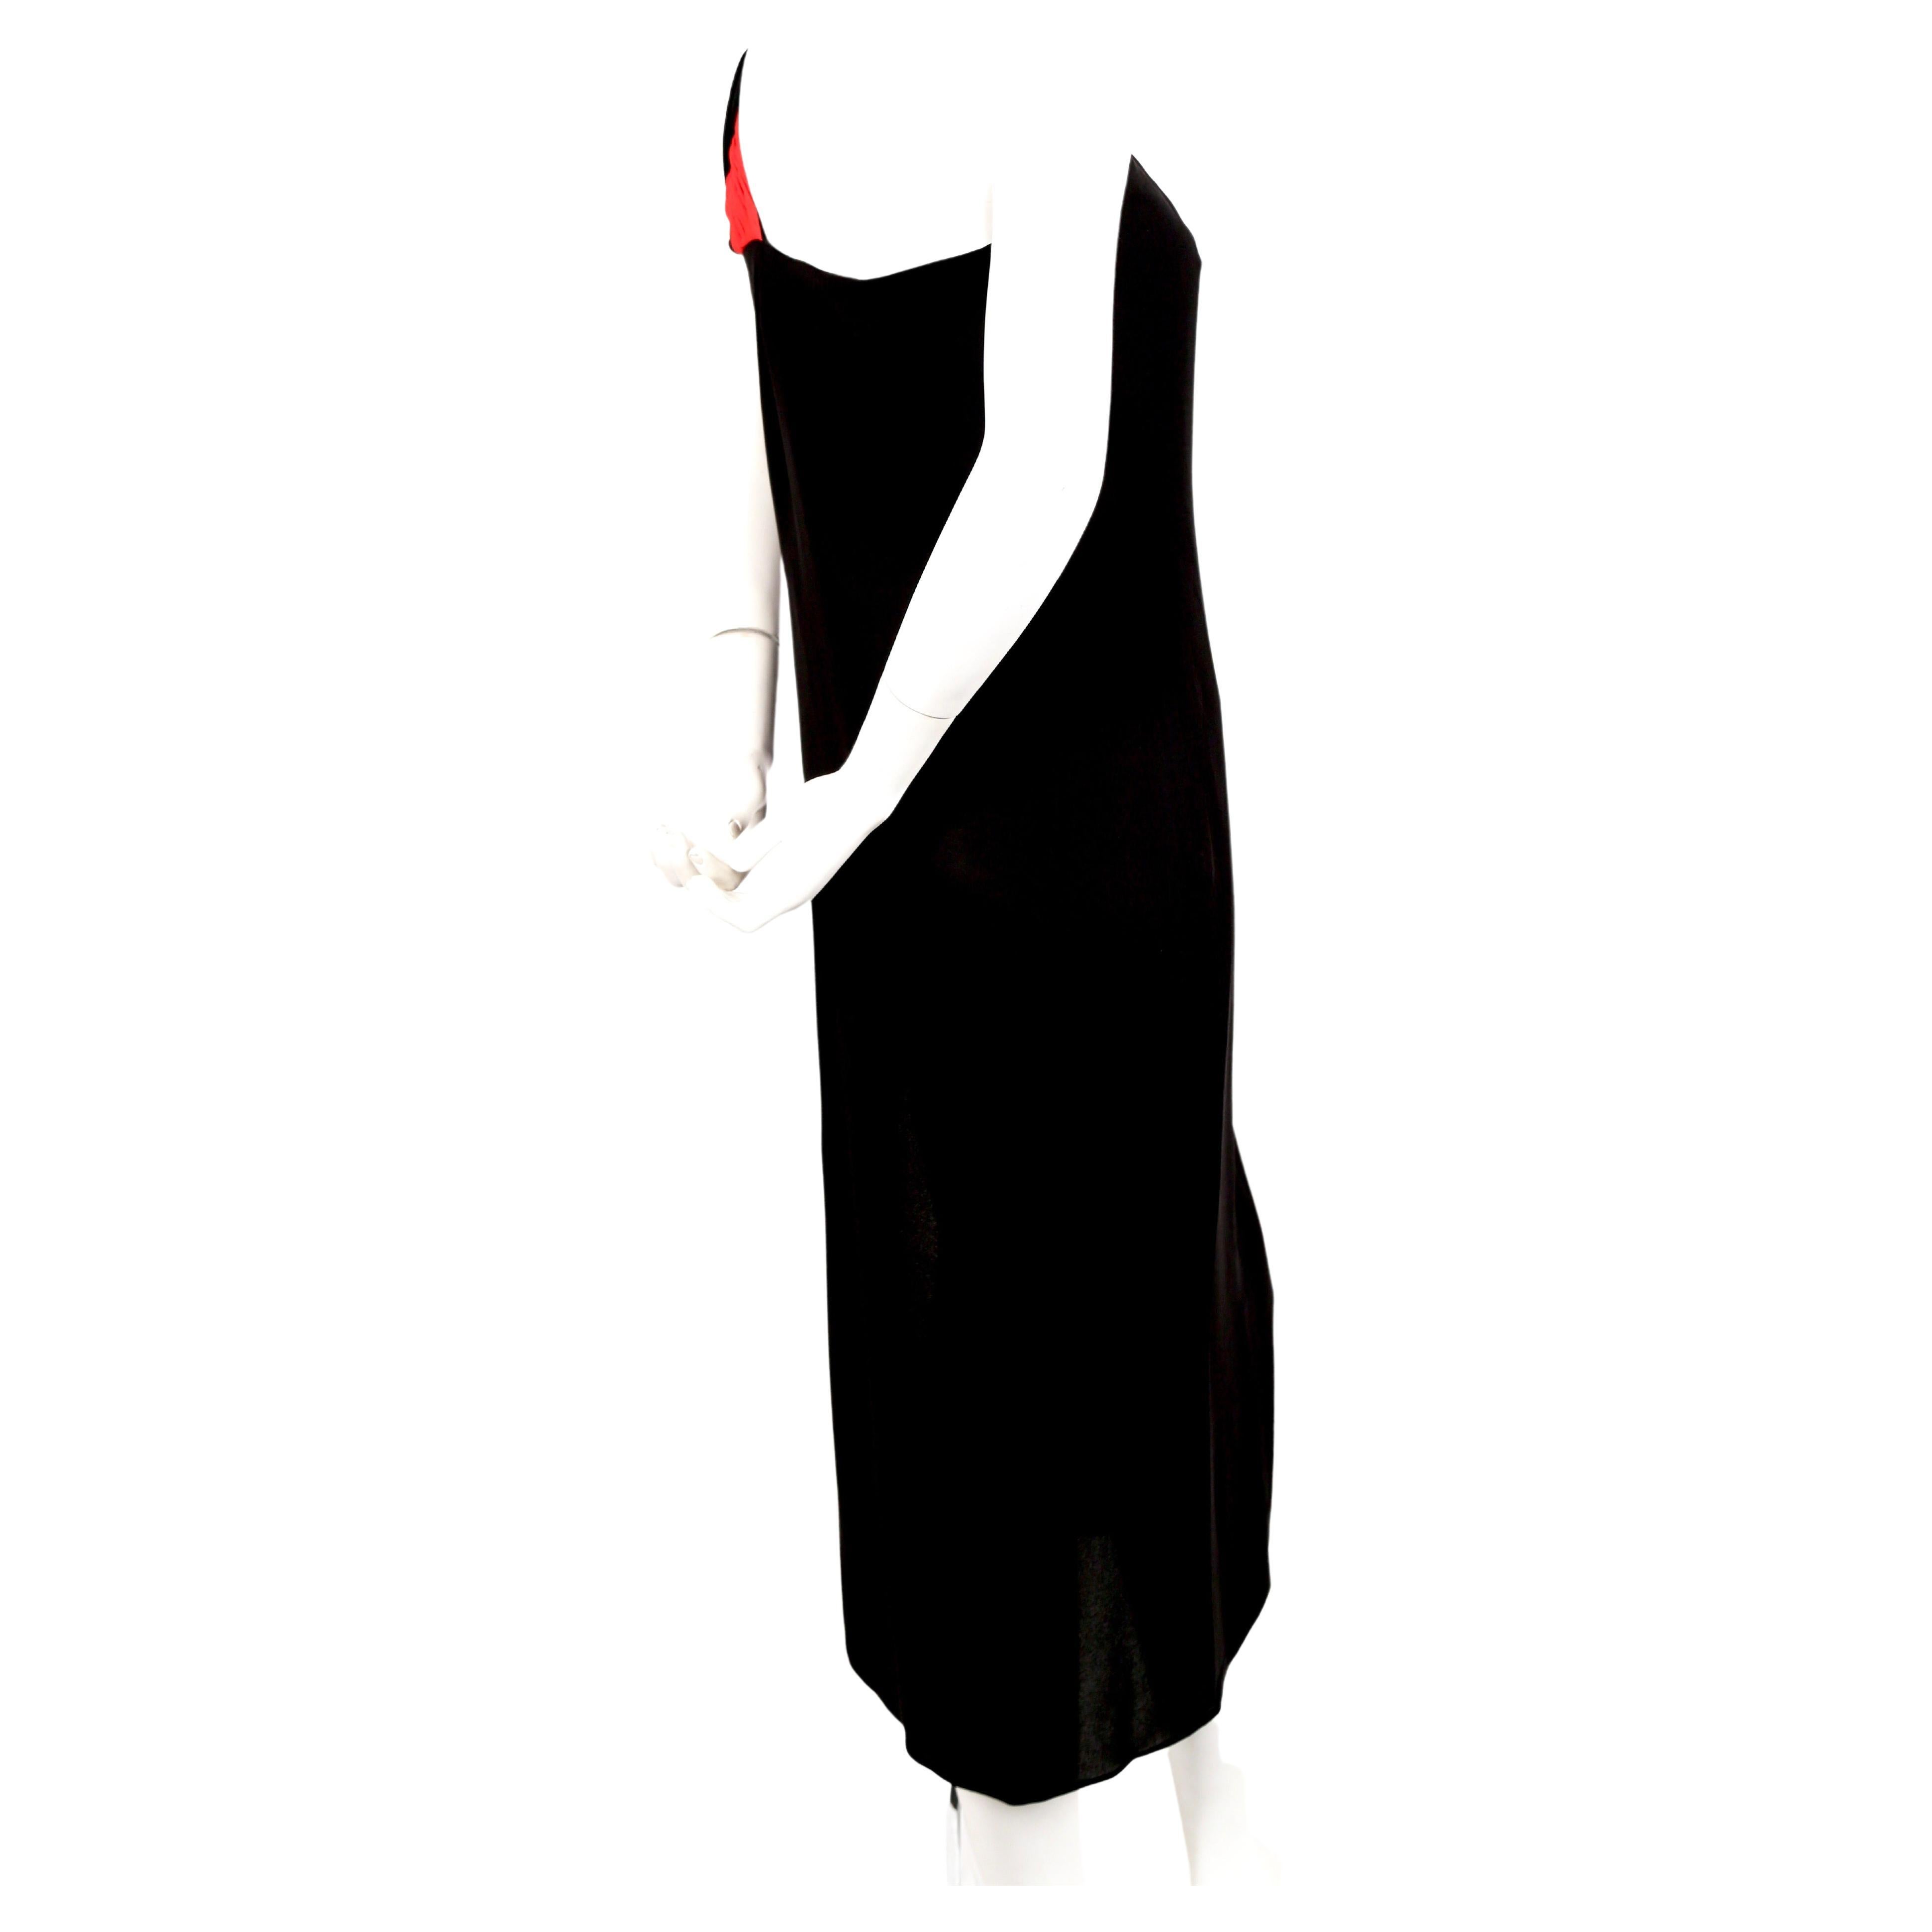 Grecian, jet-black silk dress with red pleated single shoulder from Valentino dating to the 1990's. No size is indicated however this would best fit a US 4 or French 36 or 38. Dress has an internal boned corset. Approximate measurements: bust